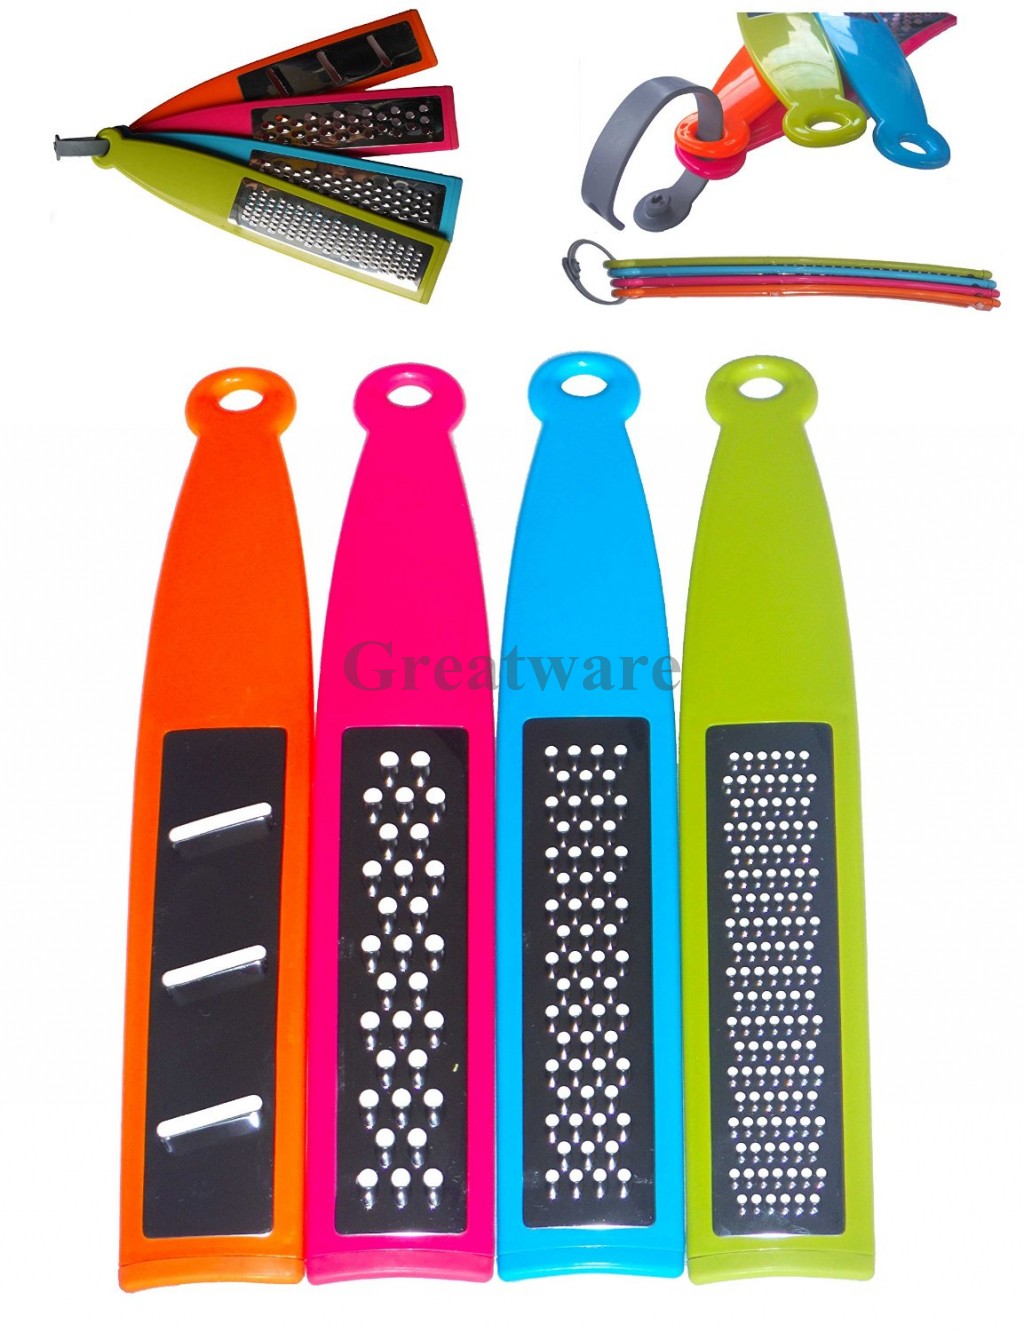 Set of 4 Multifunction Colorful Stainless Steel Graters, Zester and Slicer